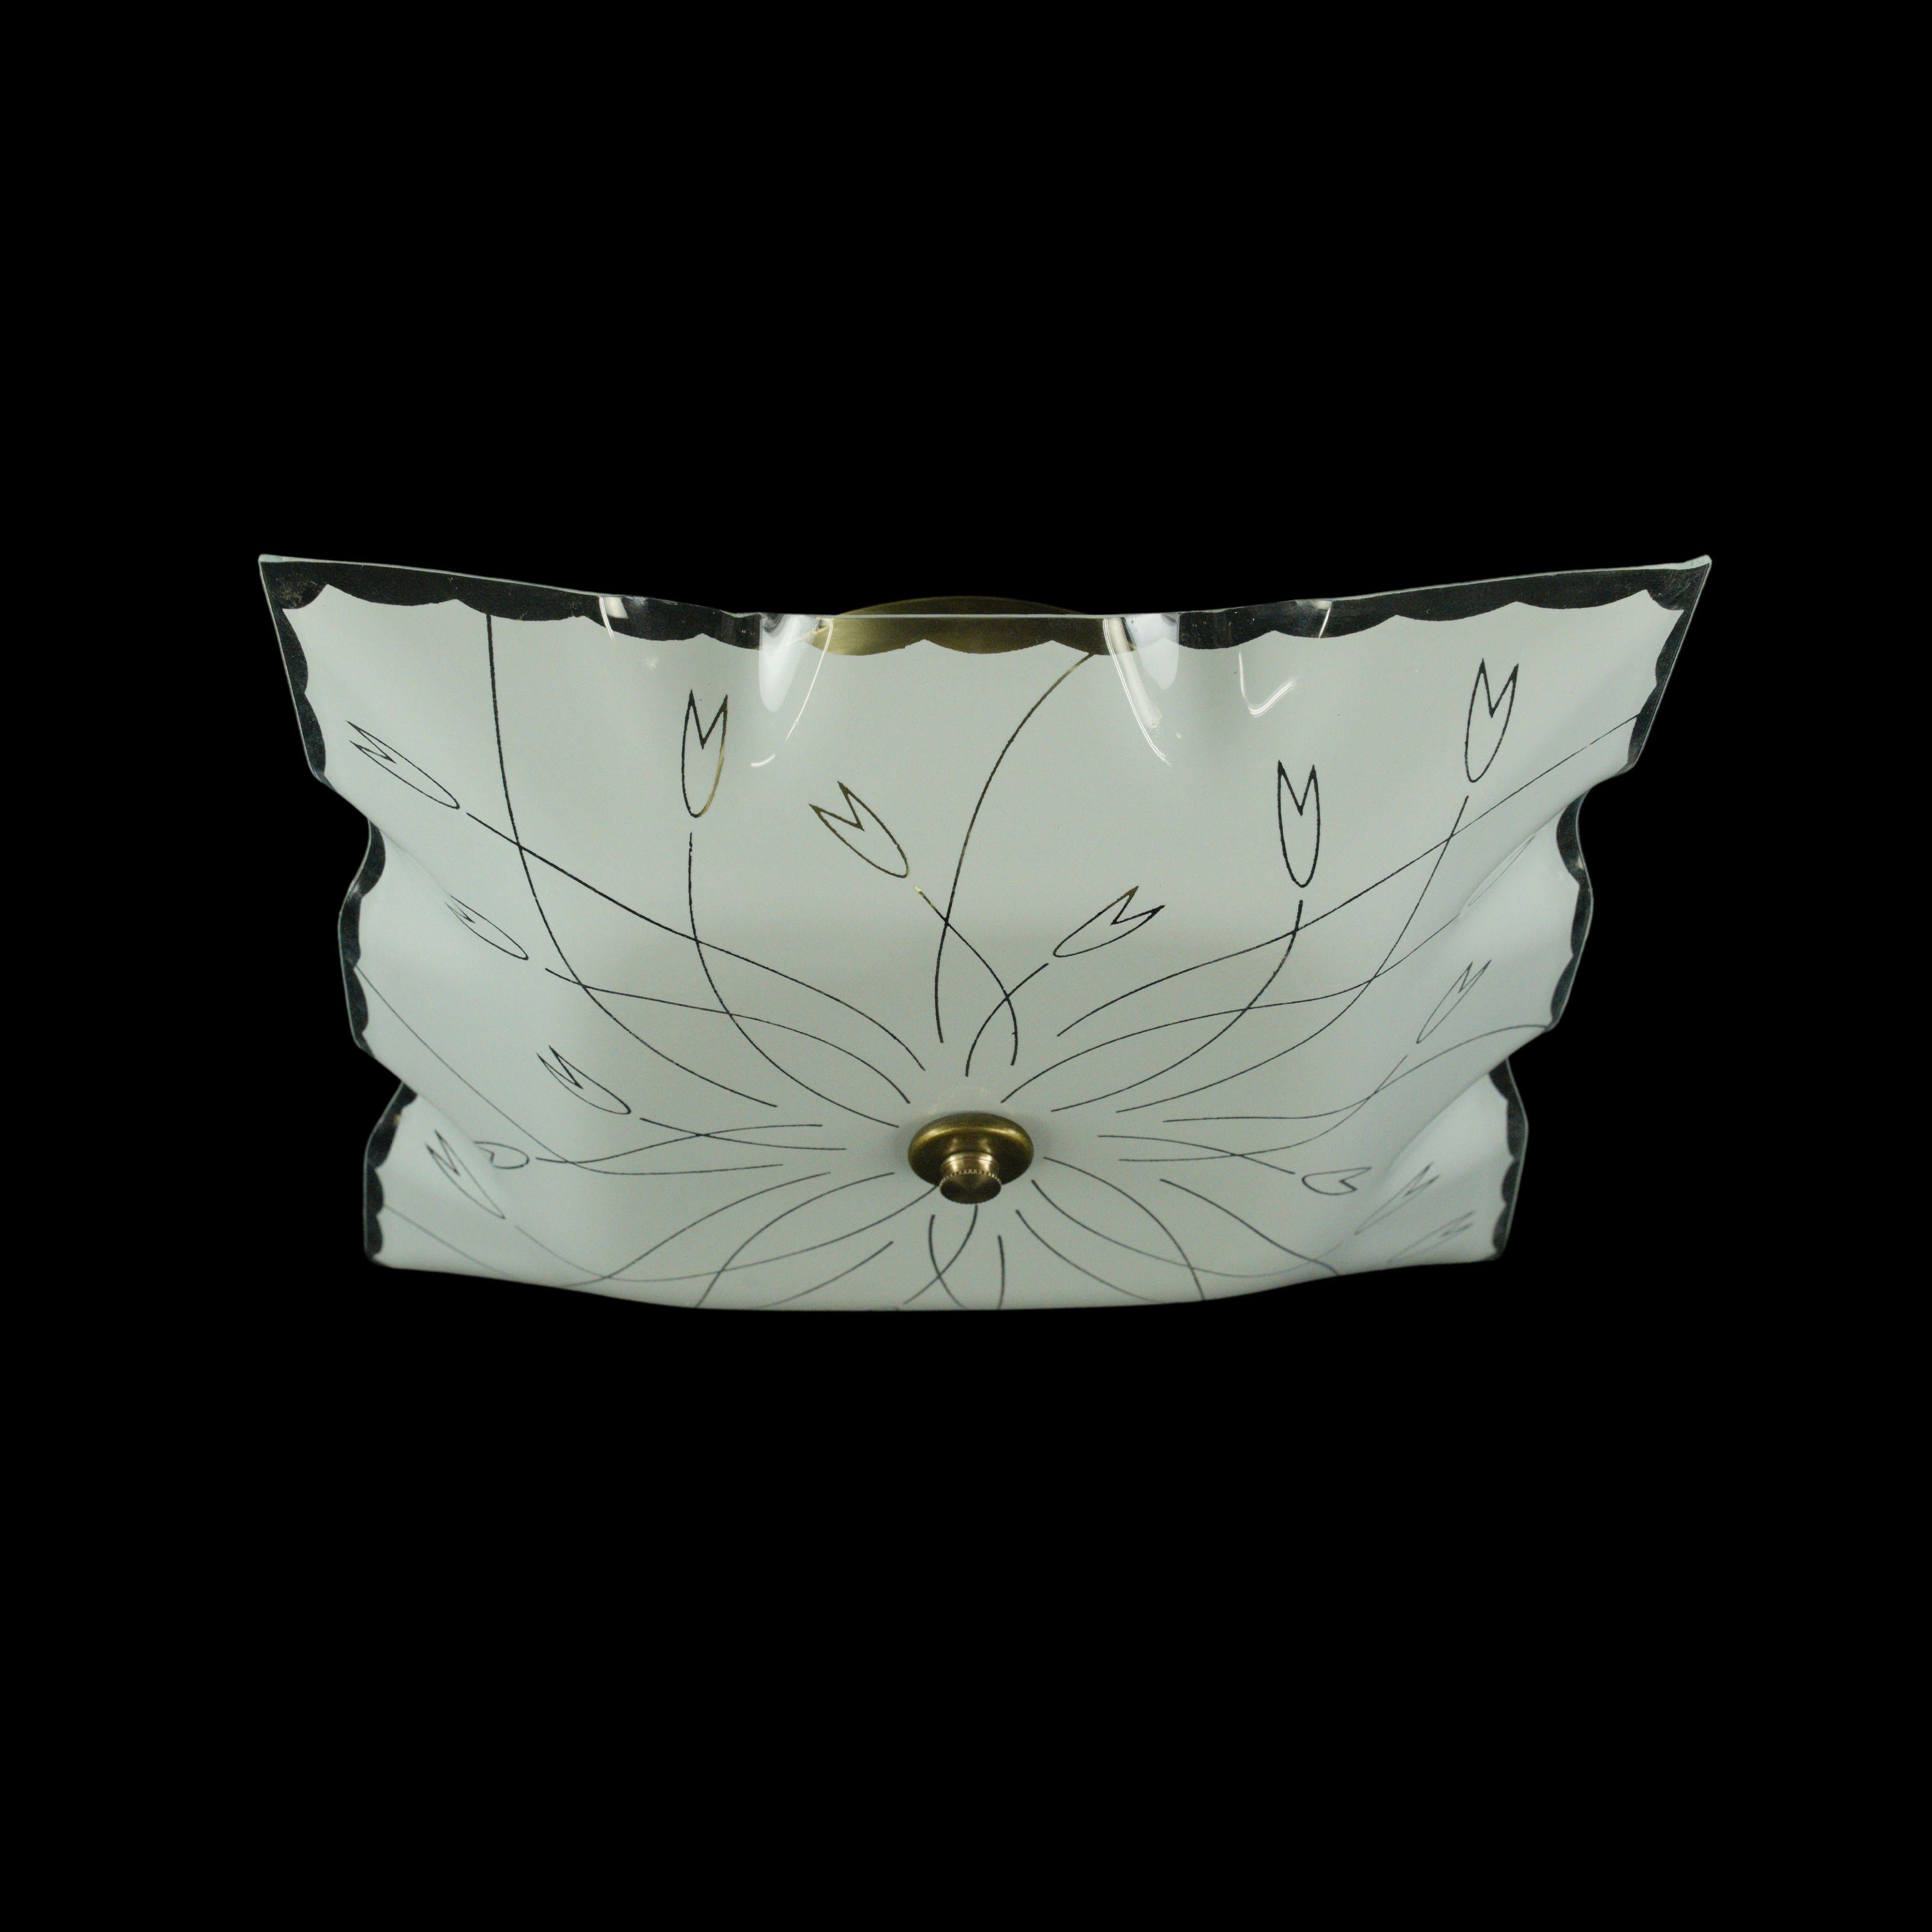 Mid-Century Modern style 1960s square glass etched floral ceiling light with brass coated steel hardware. This requires two standard medium base bulbs. This light is wired and ready to ship.  Cleaned and restored. Good condition with appropriate